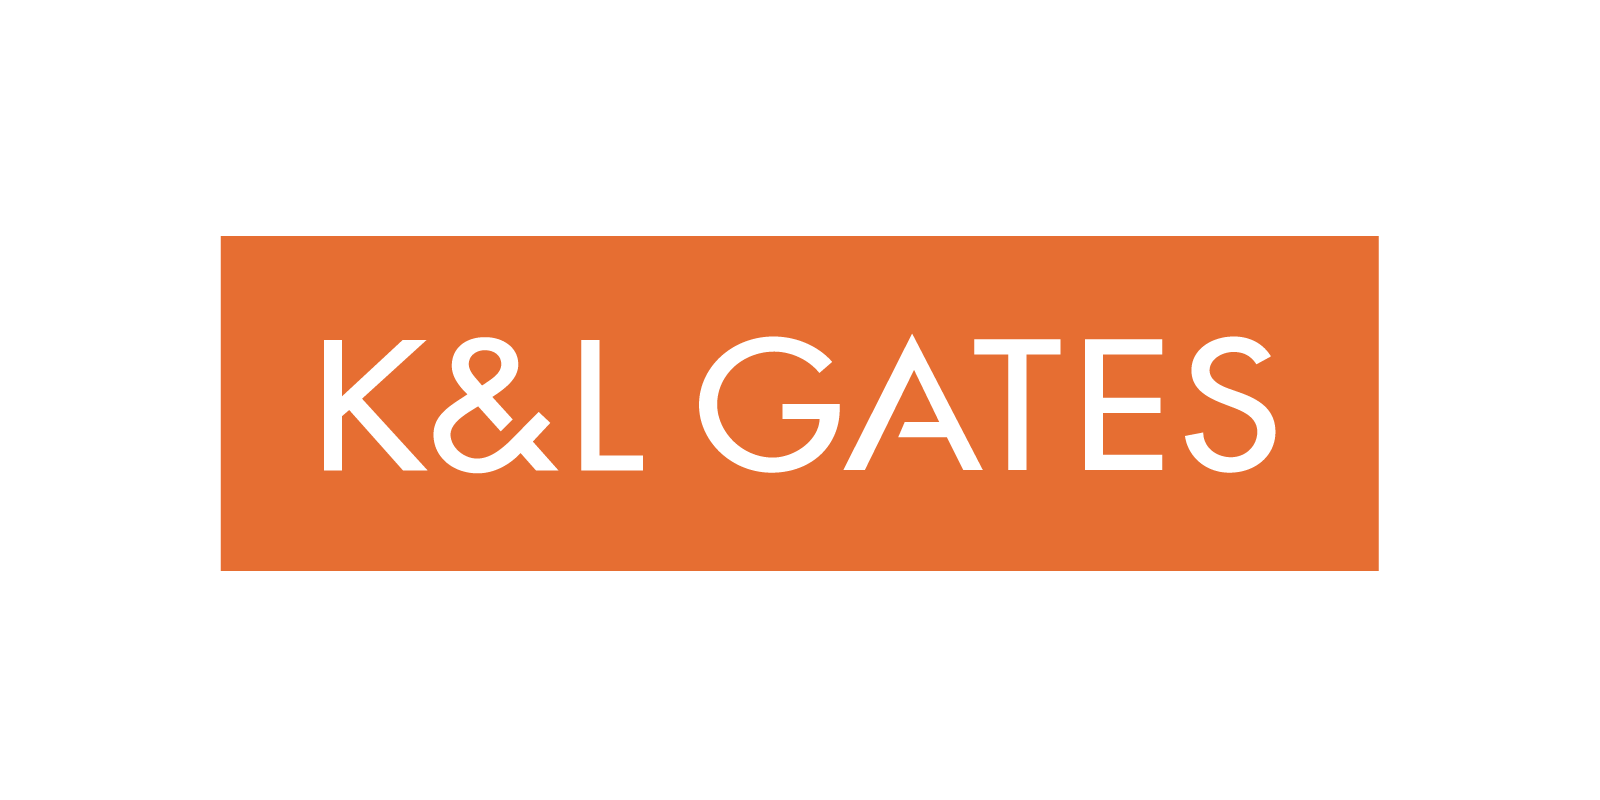 K&L Gates Adds 40 Lawyers to Firm’s Partnership | News & Events